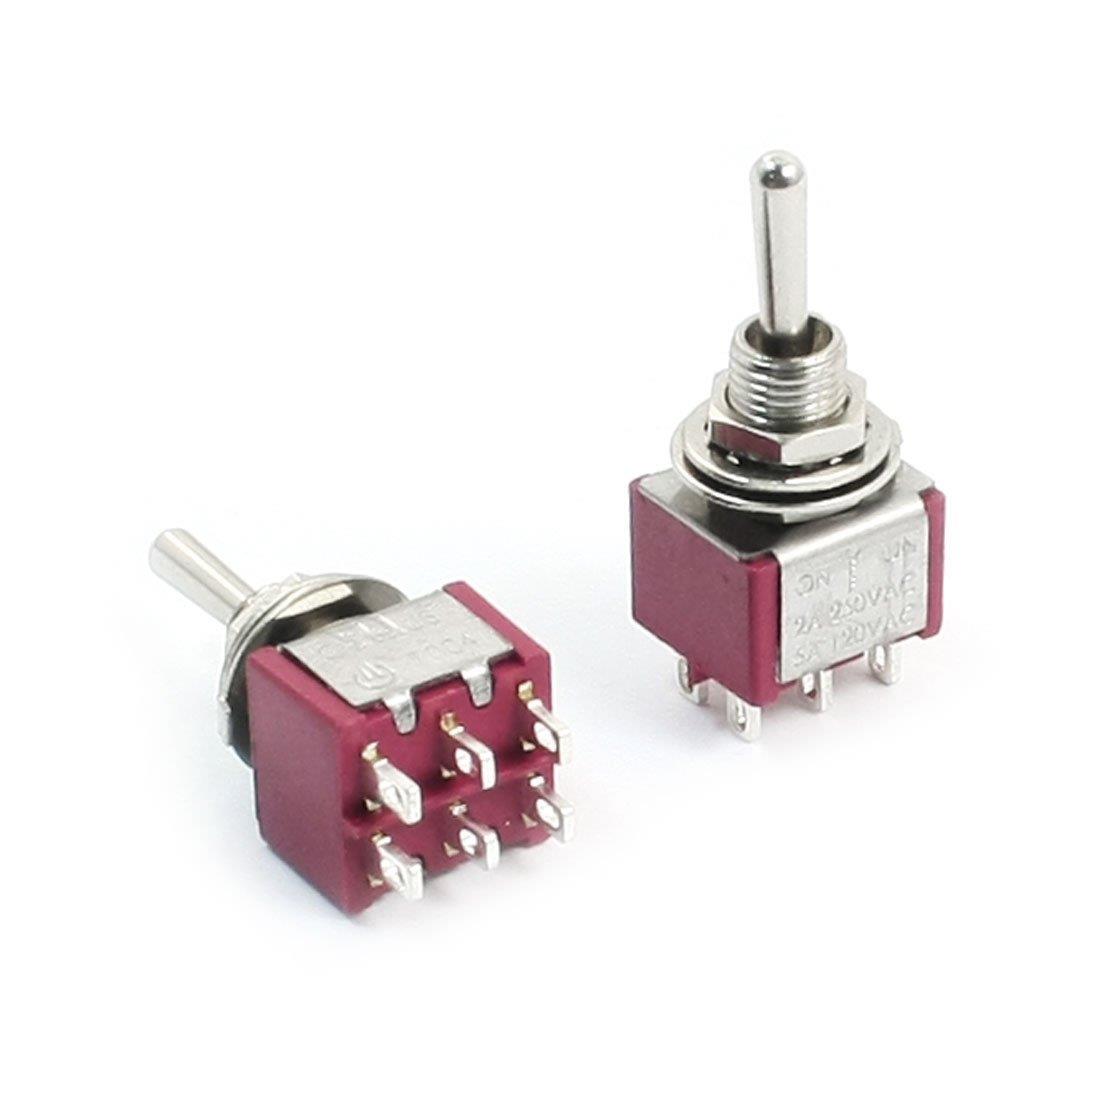 AC 250V/2A 120V/5A DPDT ON-ON 6pin Latching Toggle Switch